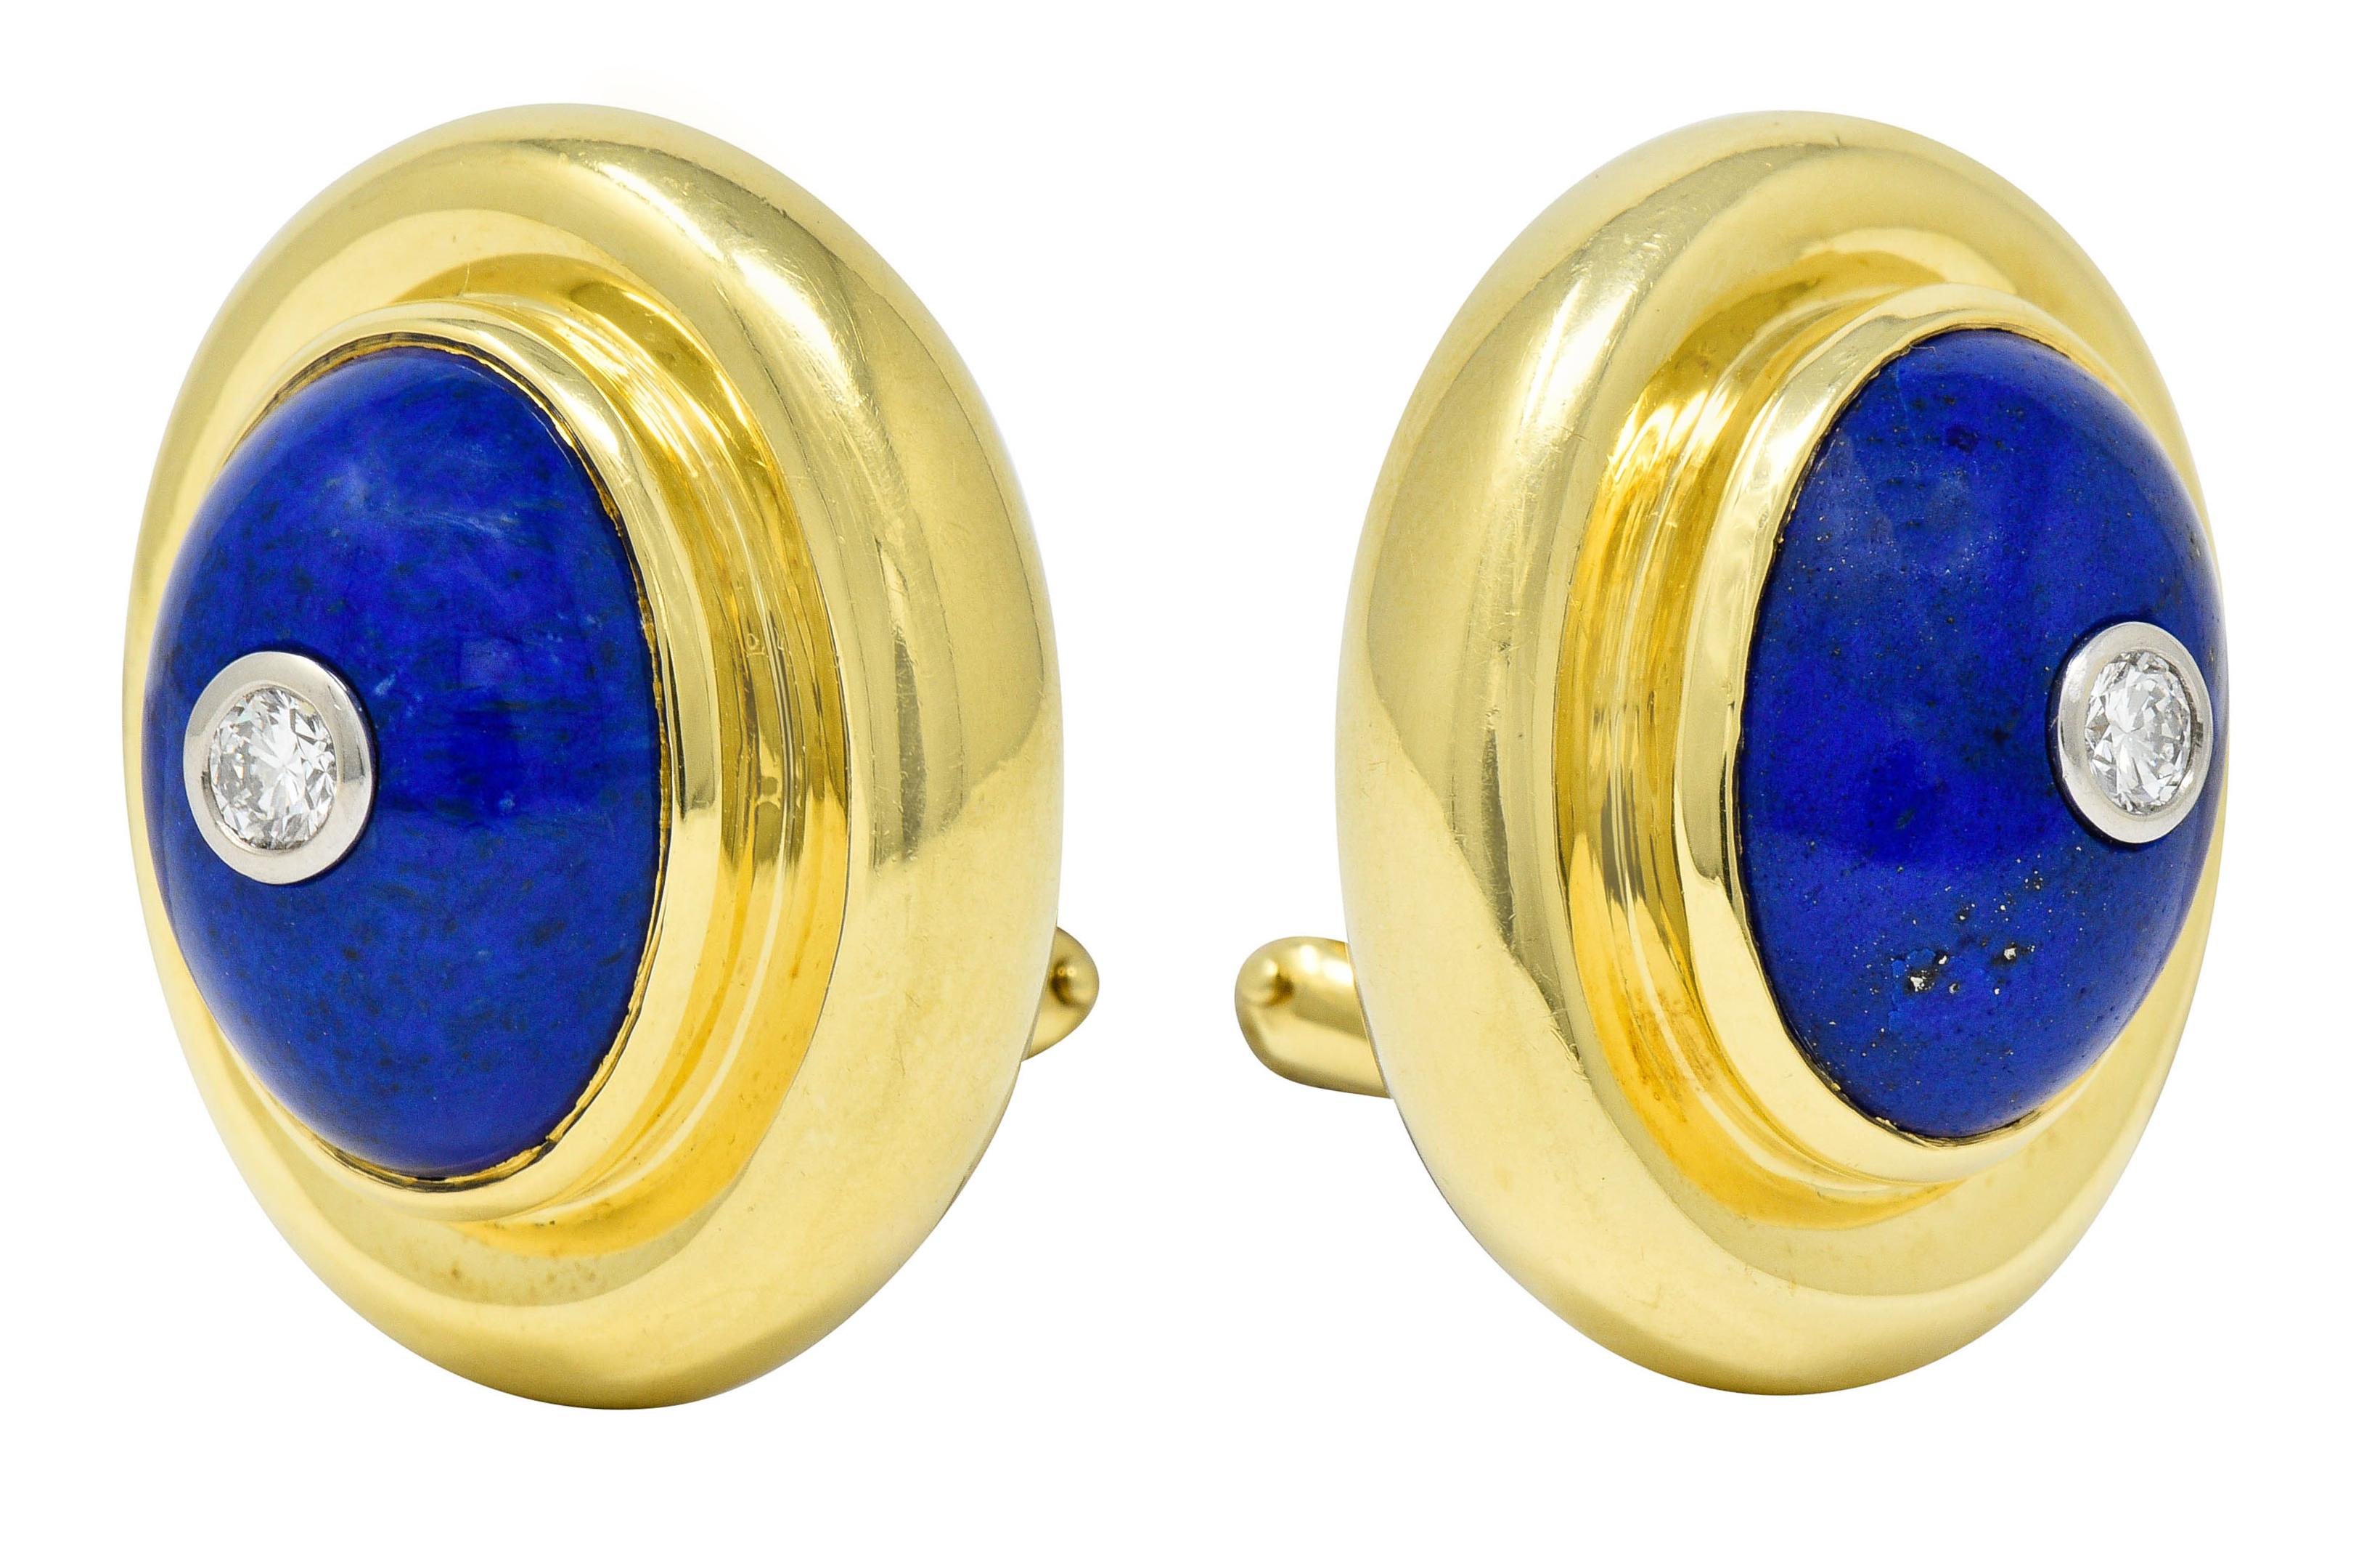 Each earring centers a round brilliant cut diamond with 0.30 carat total weight; F/G color and VS clarity

Bezel set low in an oval cabochon of lapis measuring approximately 15.0 x 11.0; uniform ultramarine color

Bezel set in a polished gold